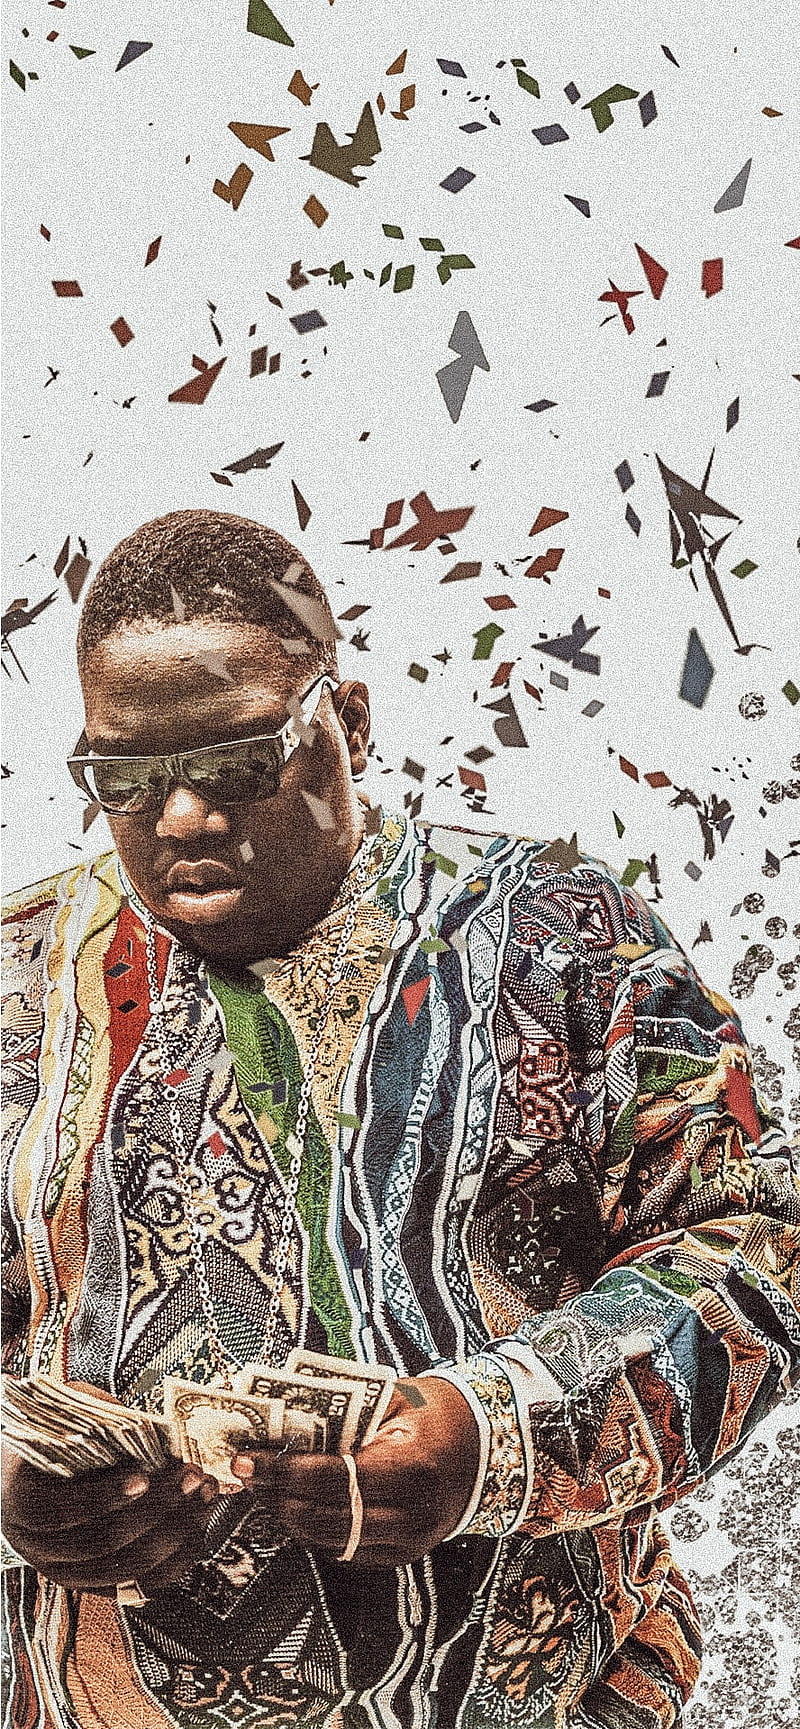 KEMS The Notorious BIG Biggie Klein Rapper Star Wallpaper Crown Poster  Decorative Painting Canvas Wall Art Living Room Poster Bedroom Painting  30x45cm  Amazonde Home  Kitchen